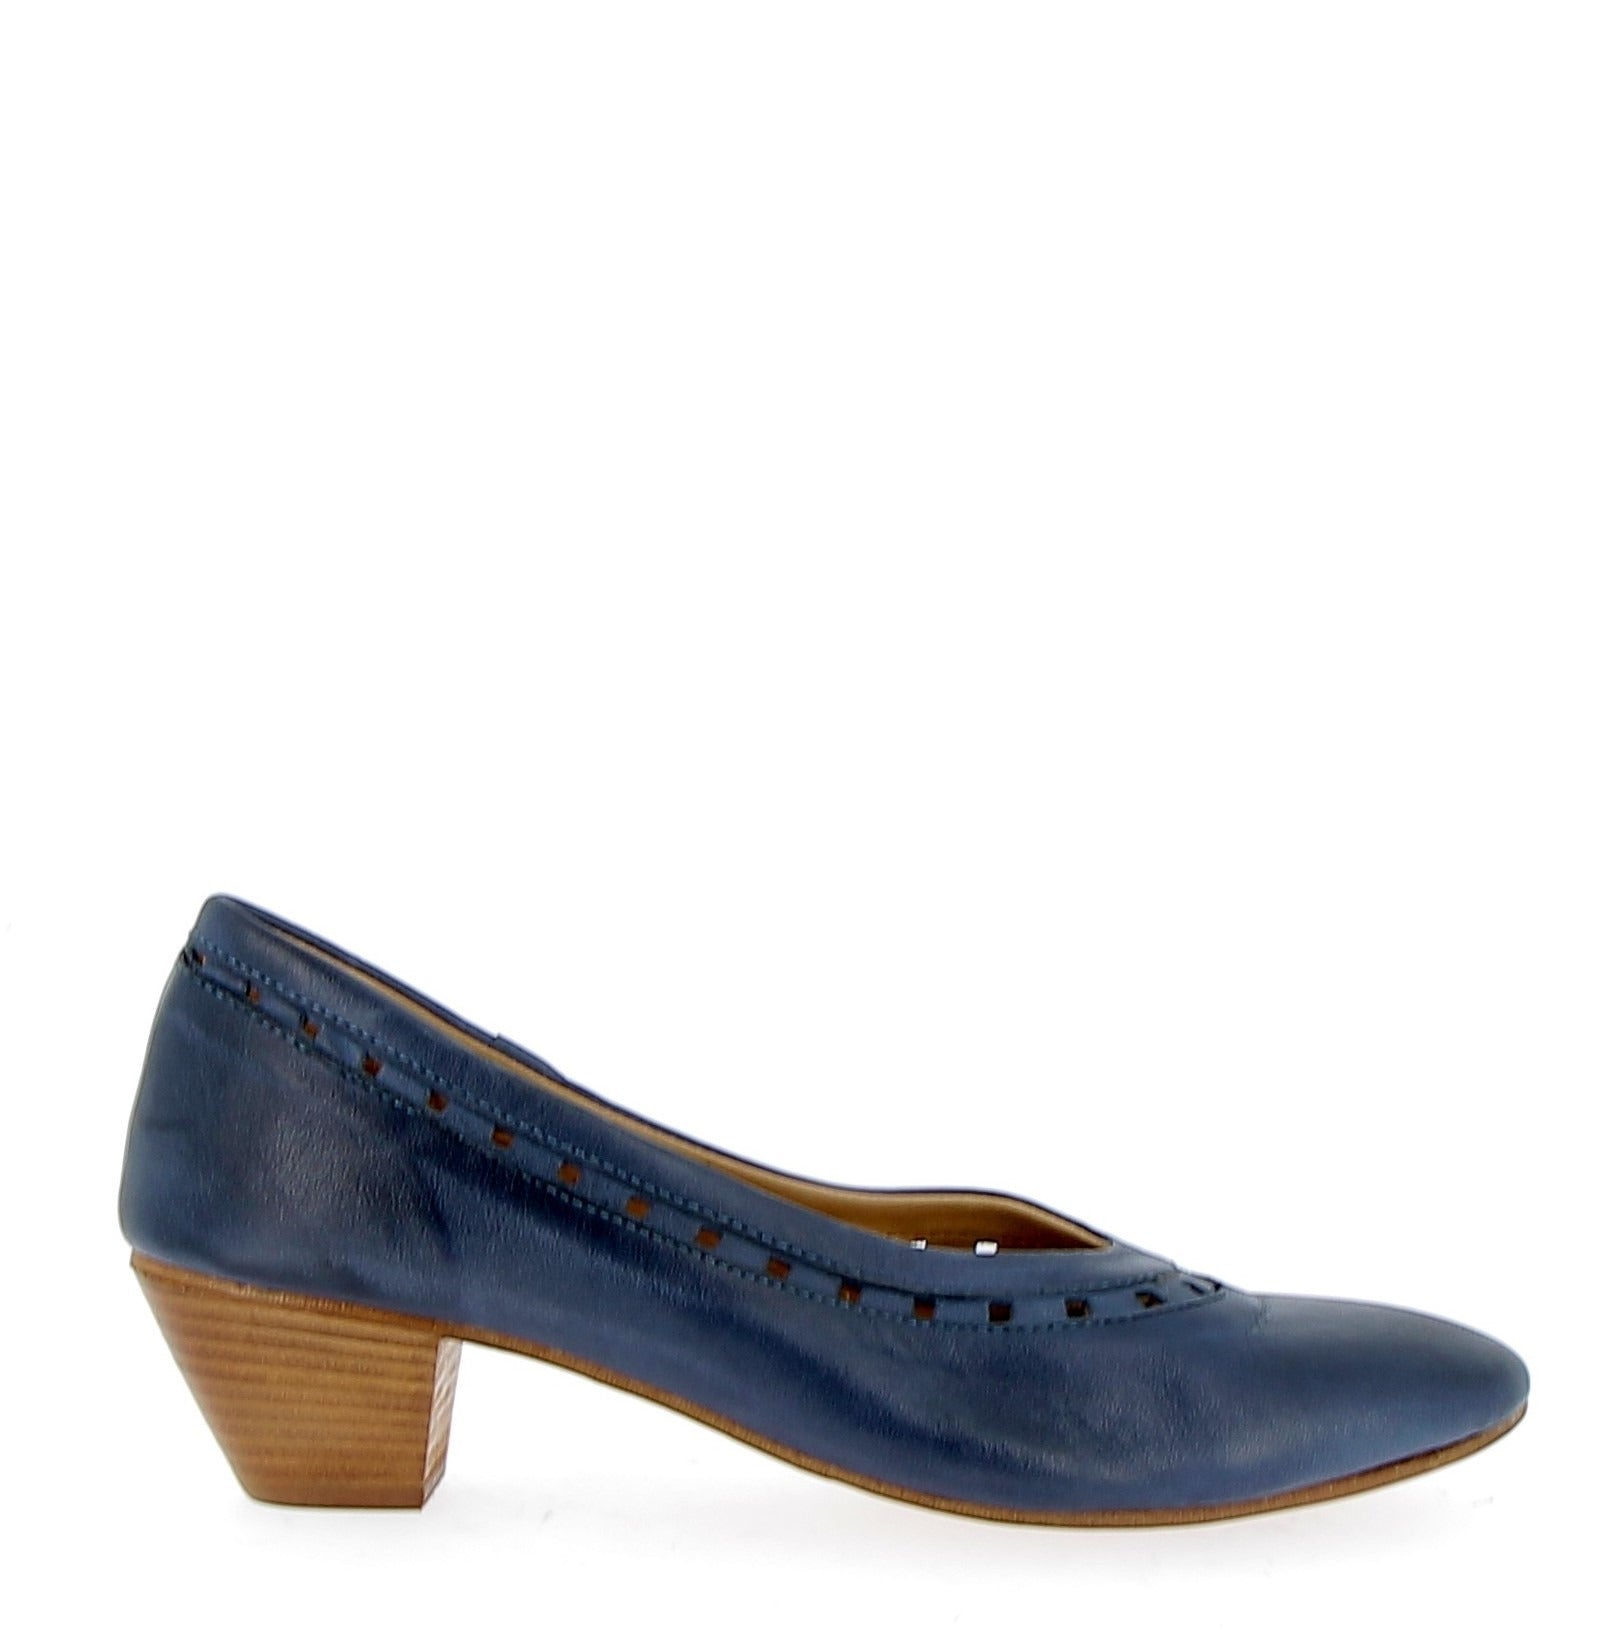 blue leather high neck shoe with perforated pattern